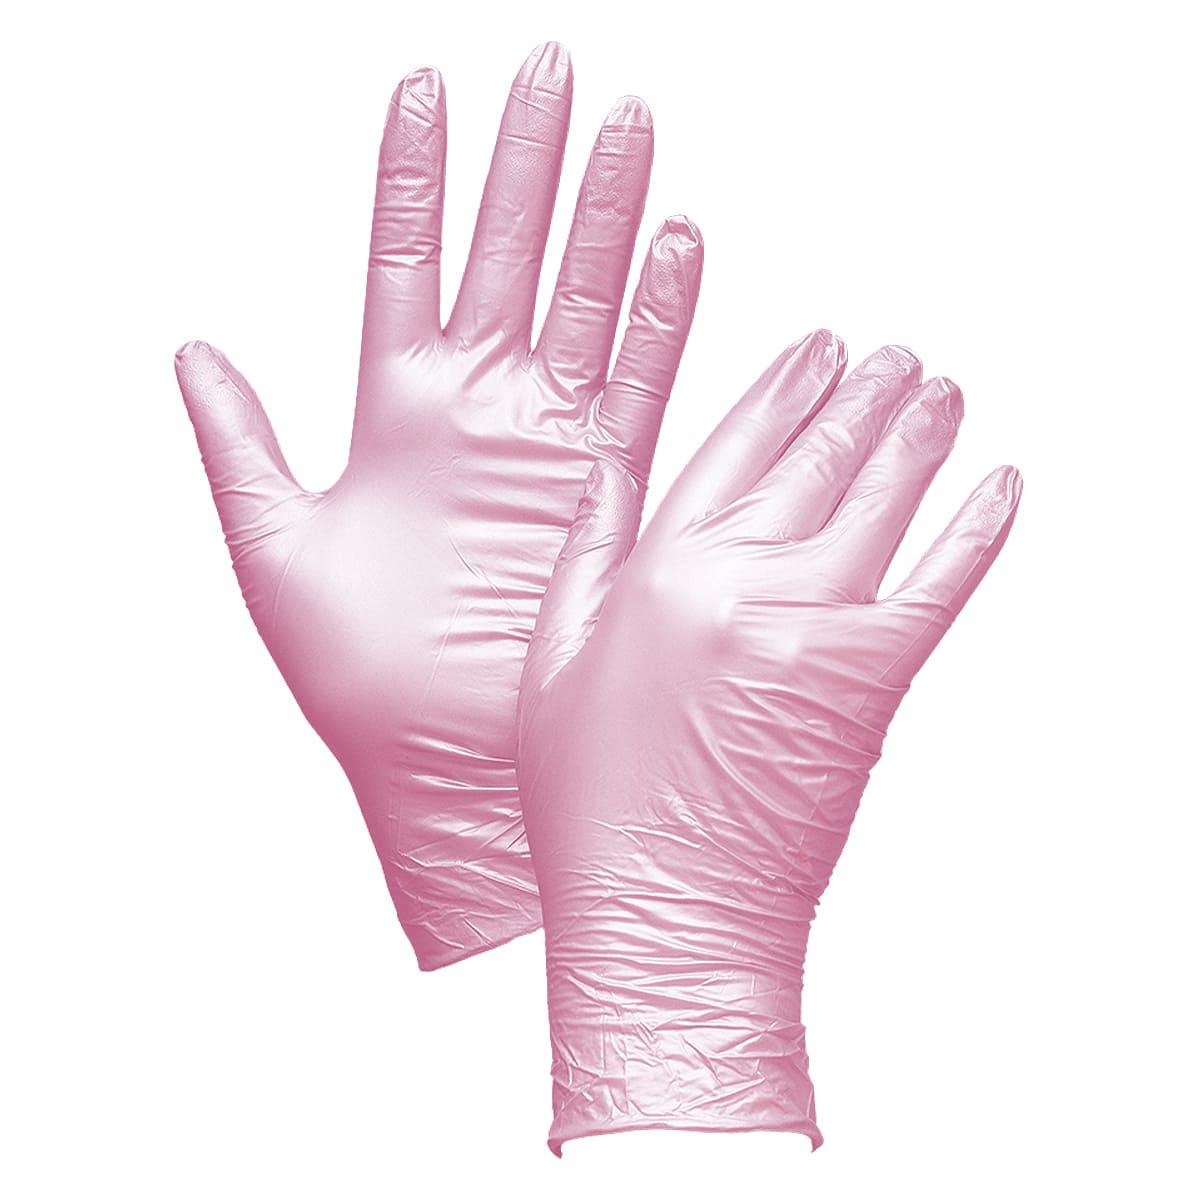 Unigloves Nitrile Gloves Fancy Rose - Tattoo Everything Supplies